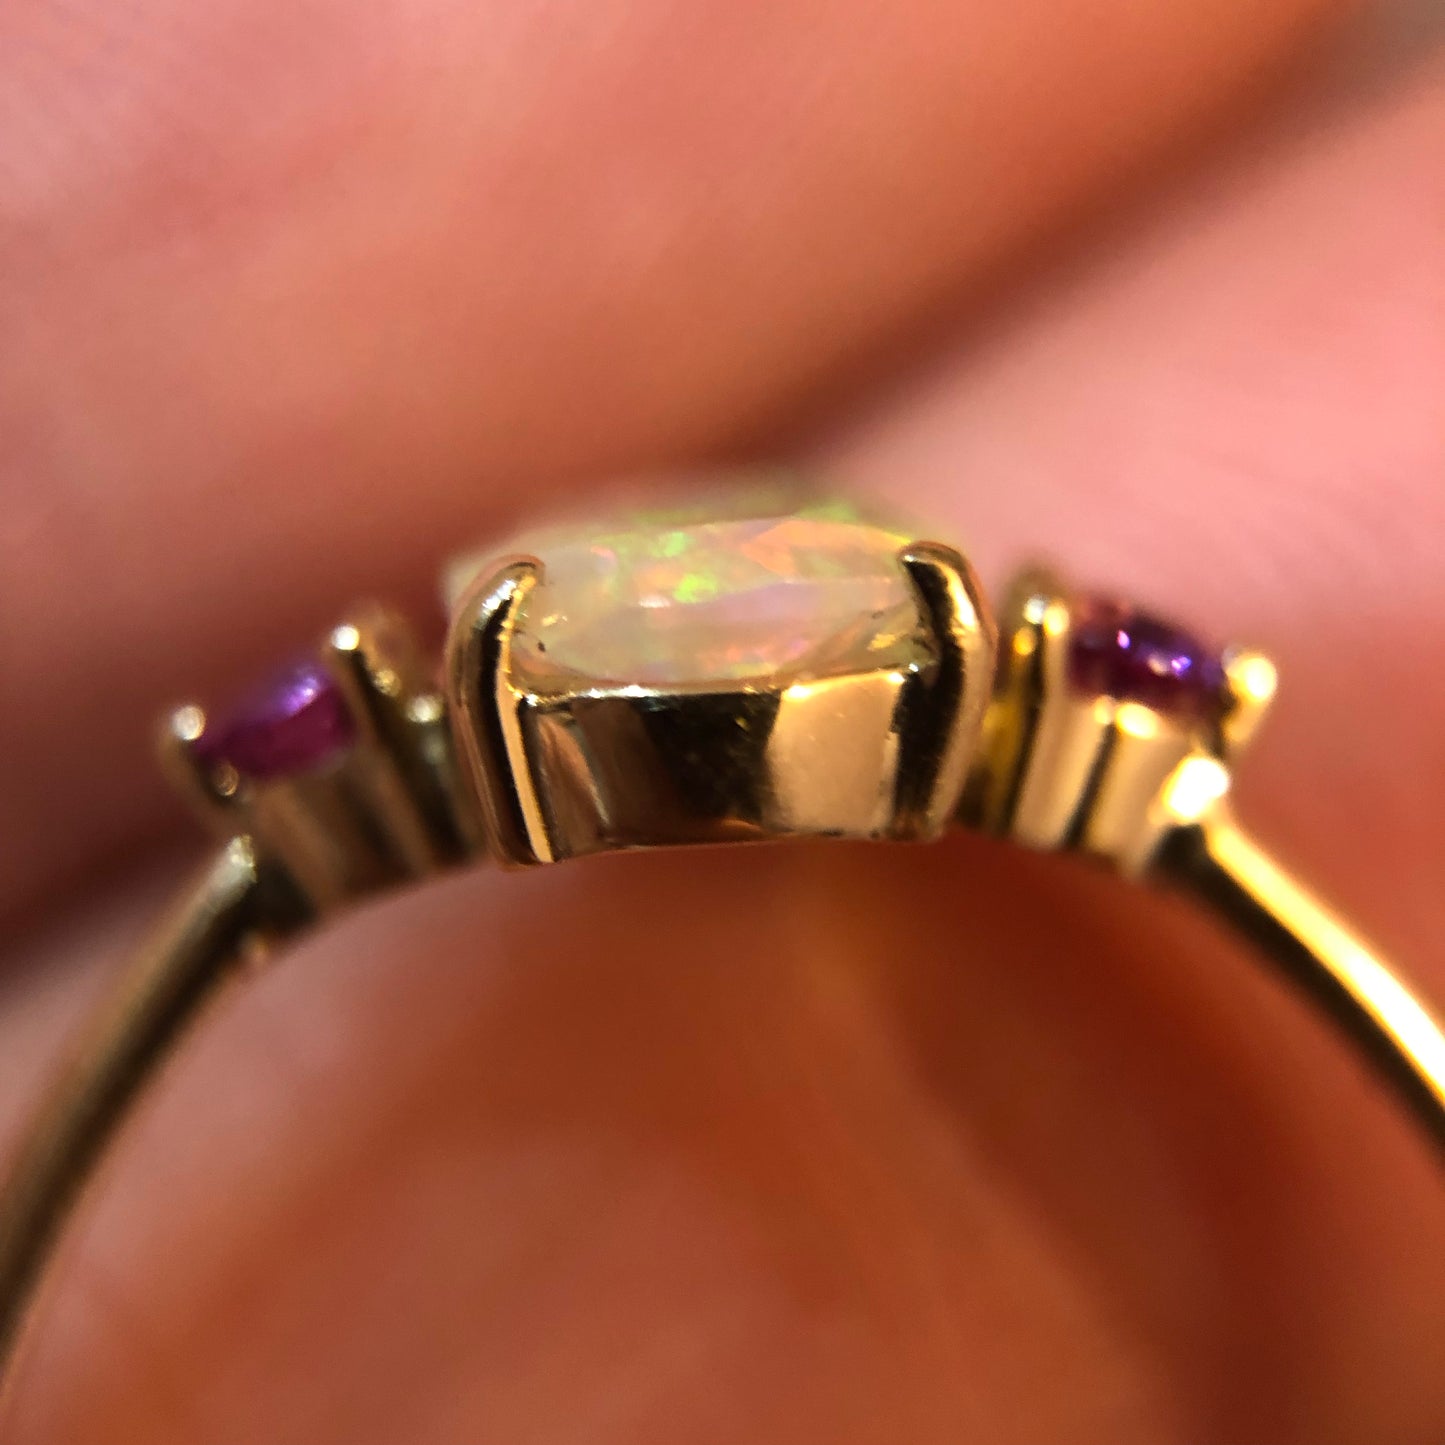 Faceted Opal ring with pink/purple sapphires